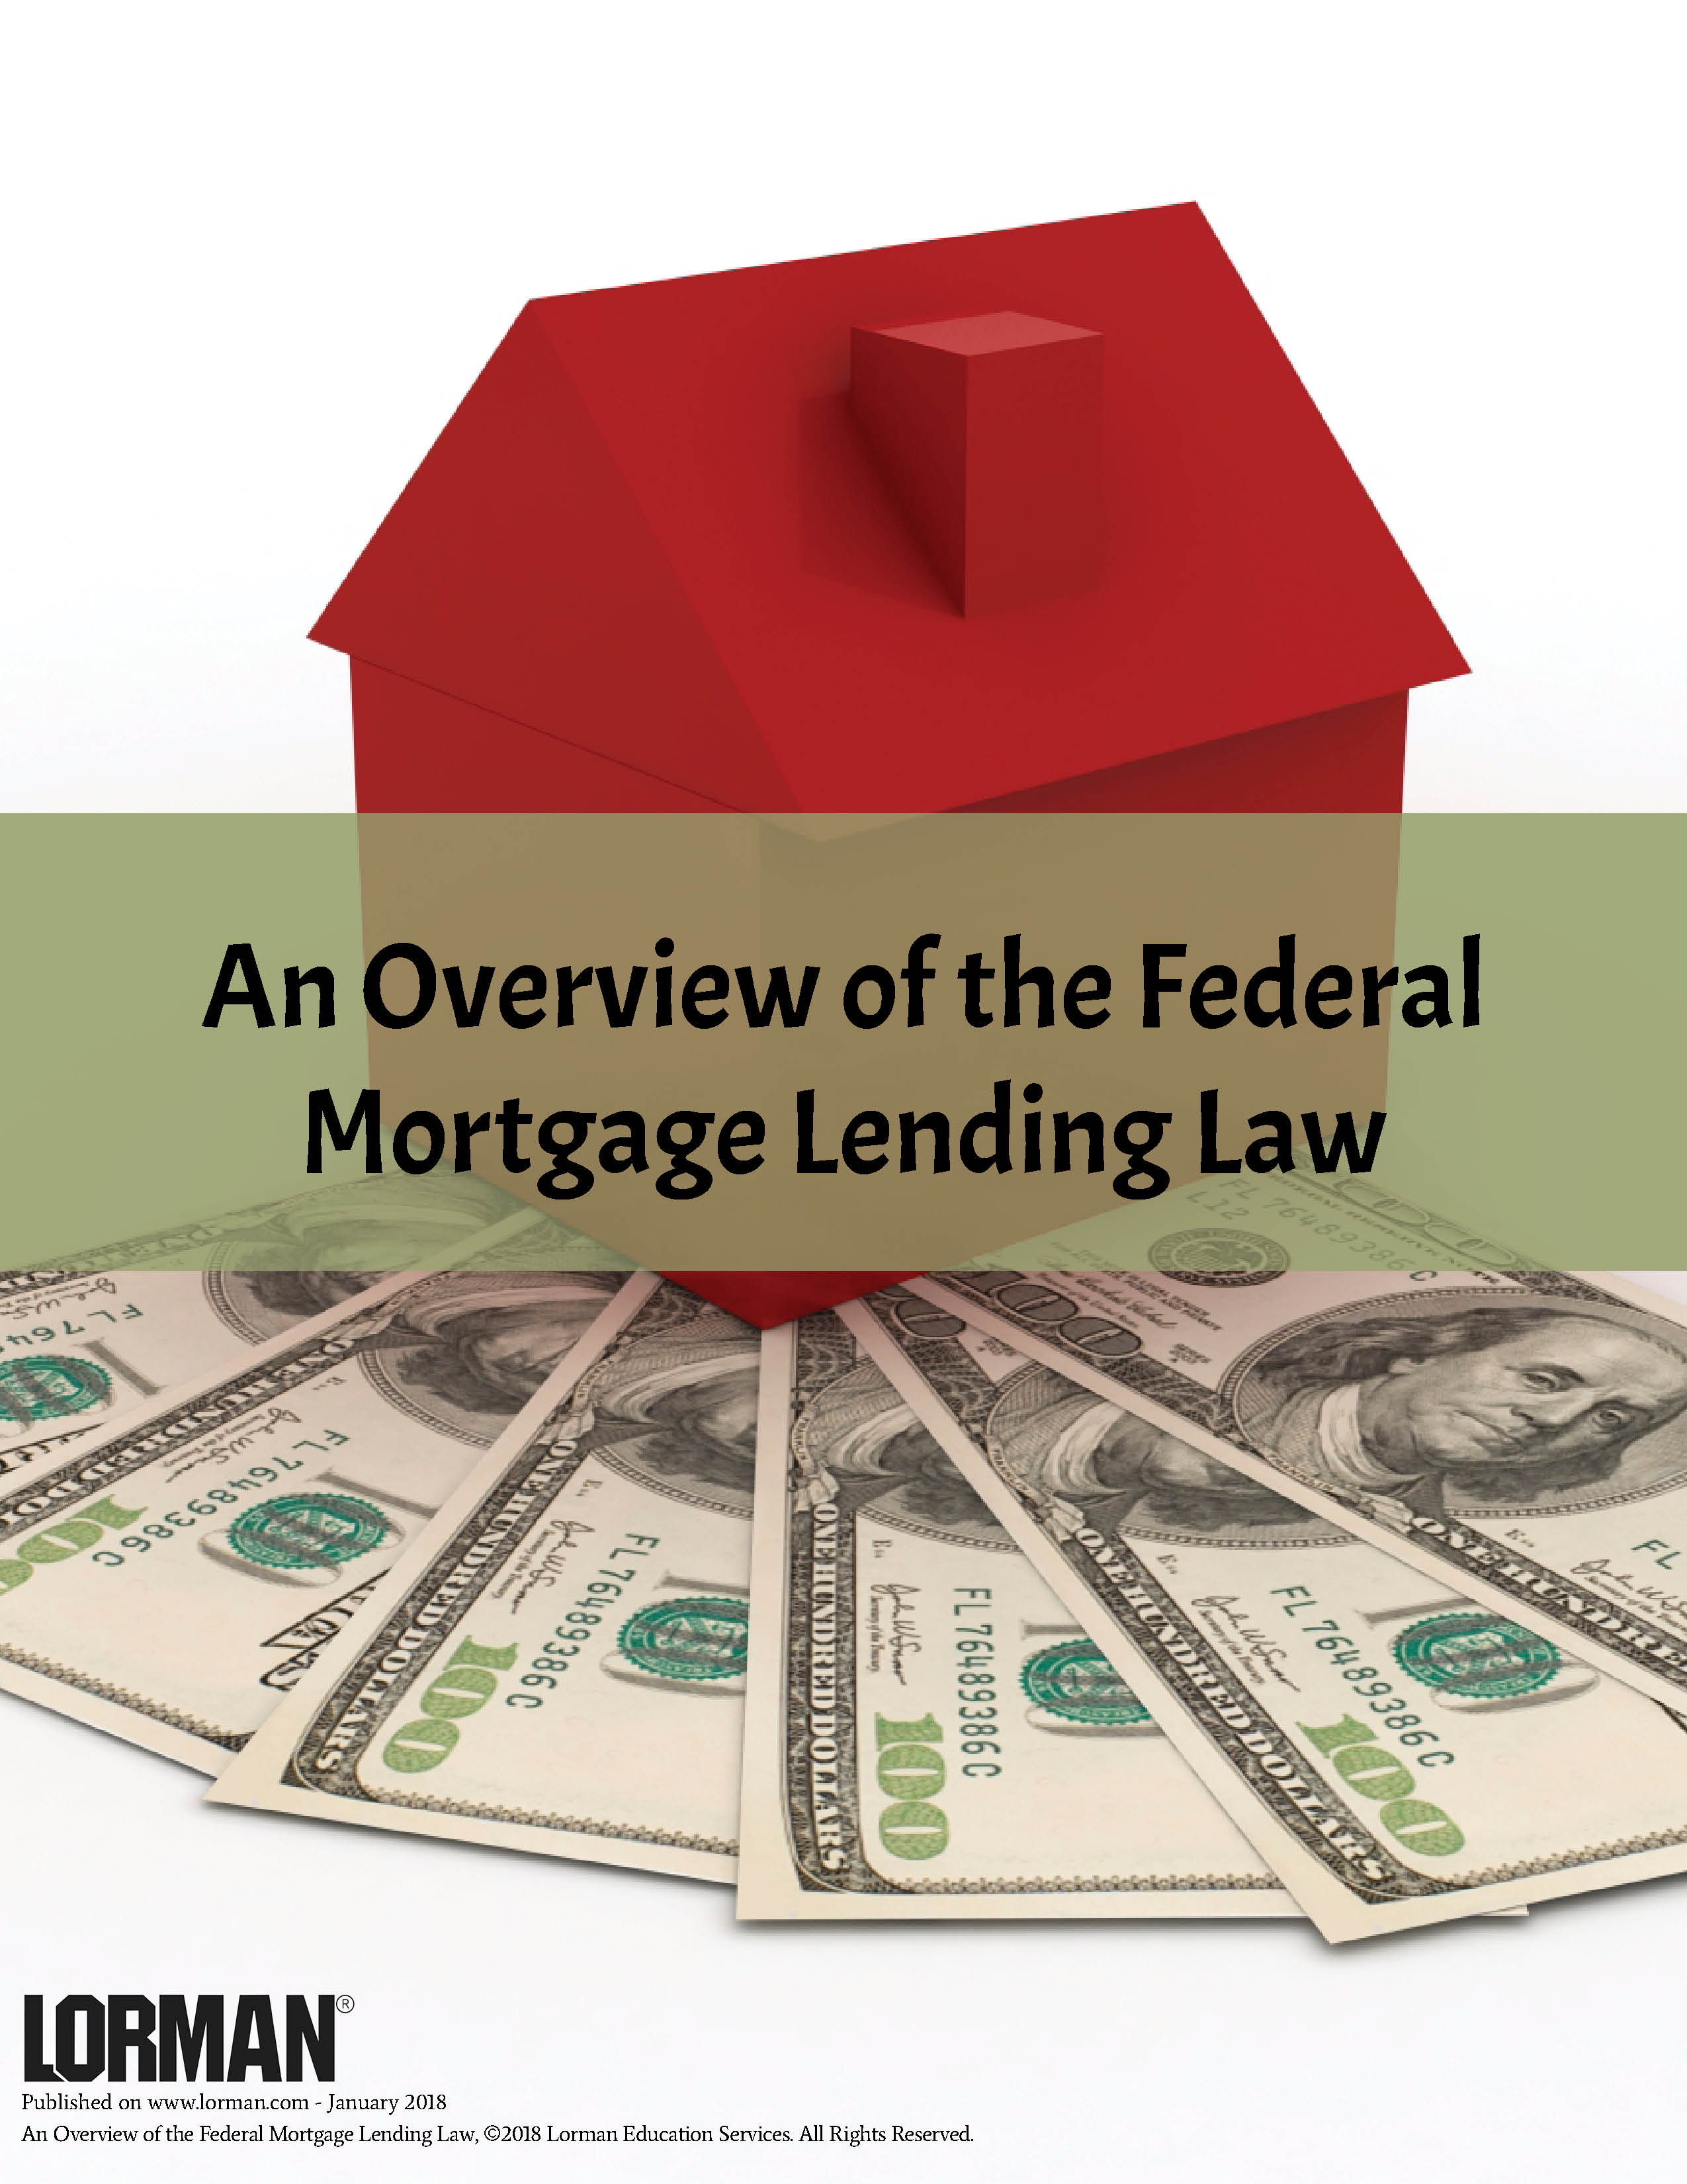 An Overview of the Federal Mortgage Lending Law